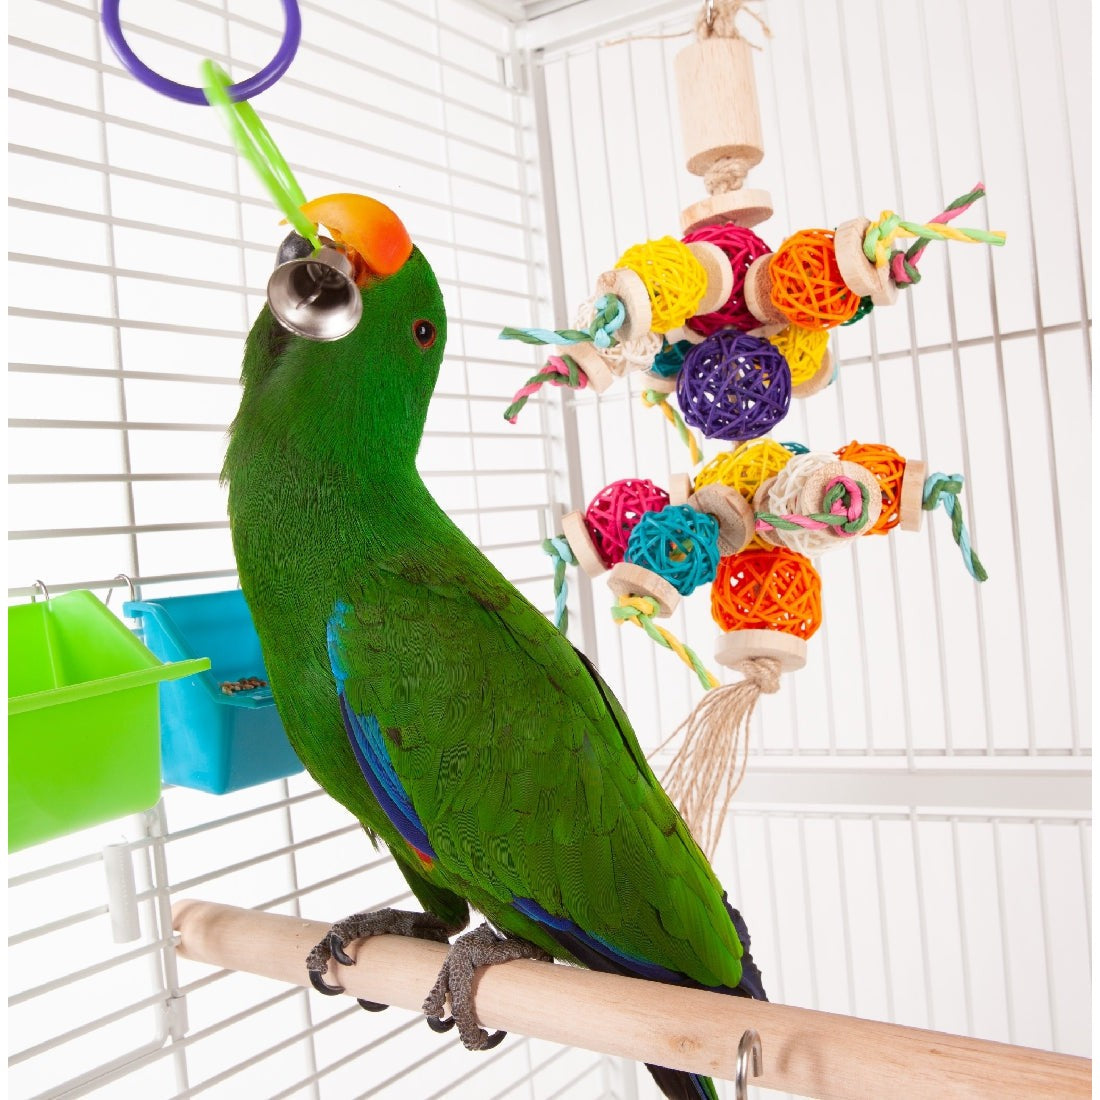 A colorful eclectus parrot playing with a hanging bird toy.